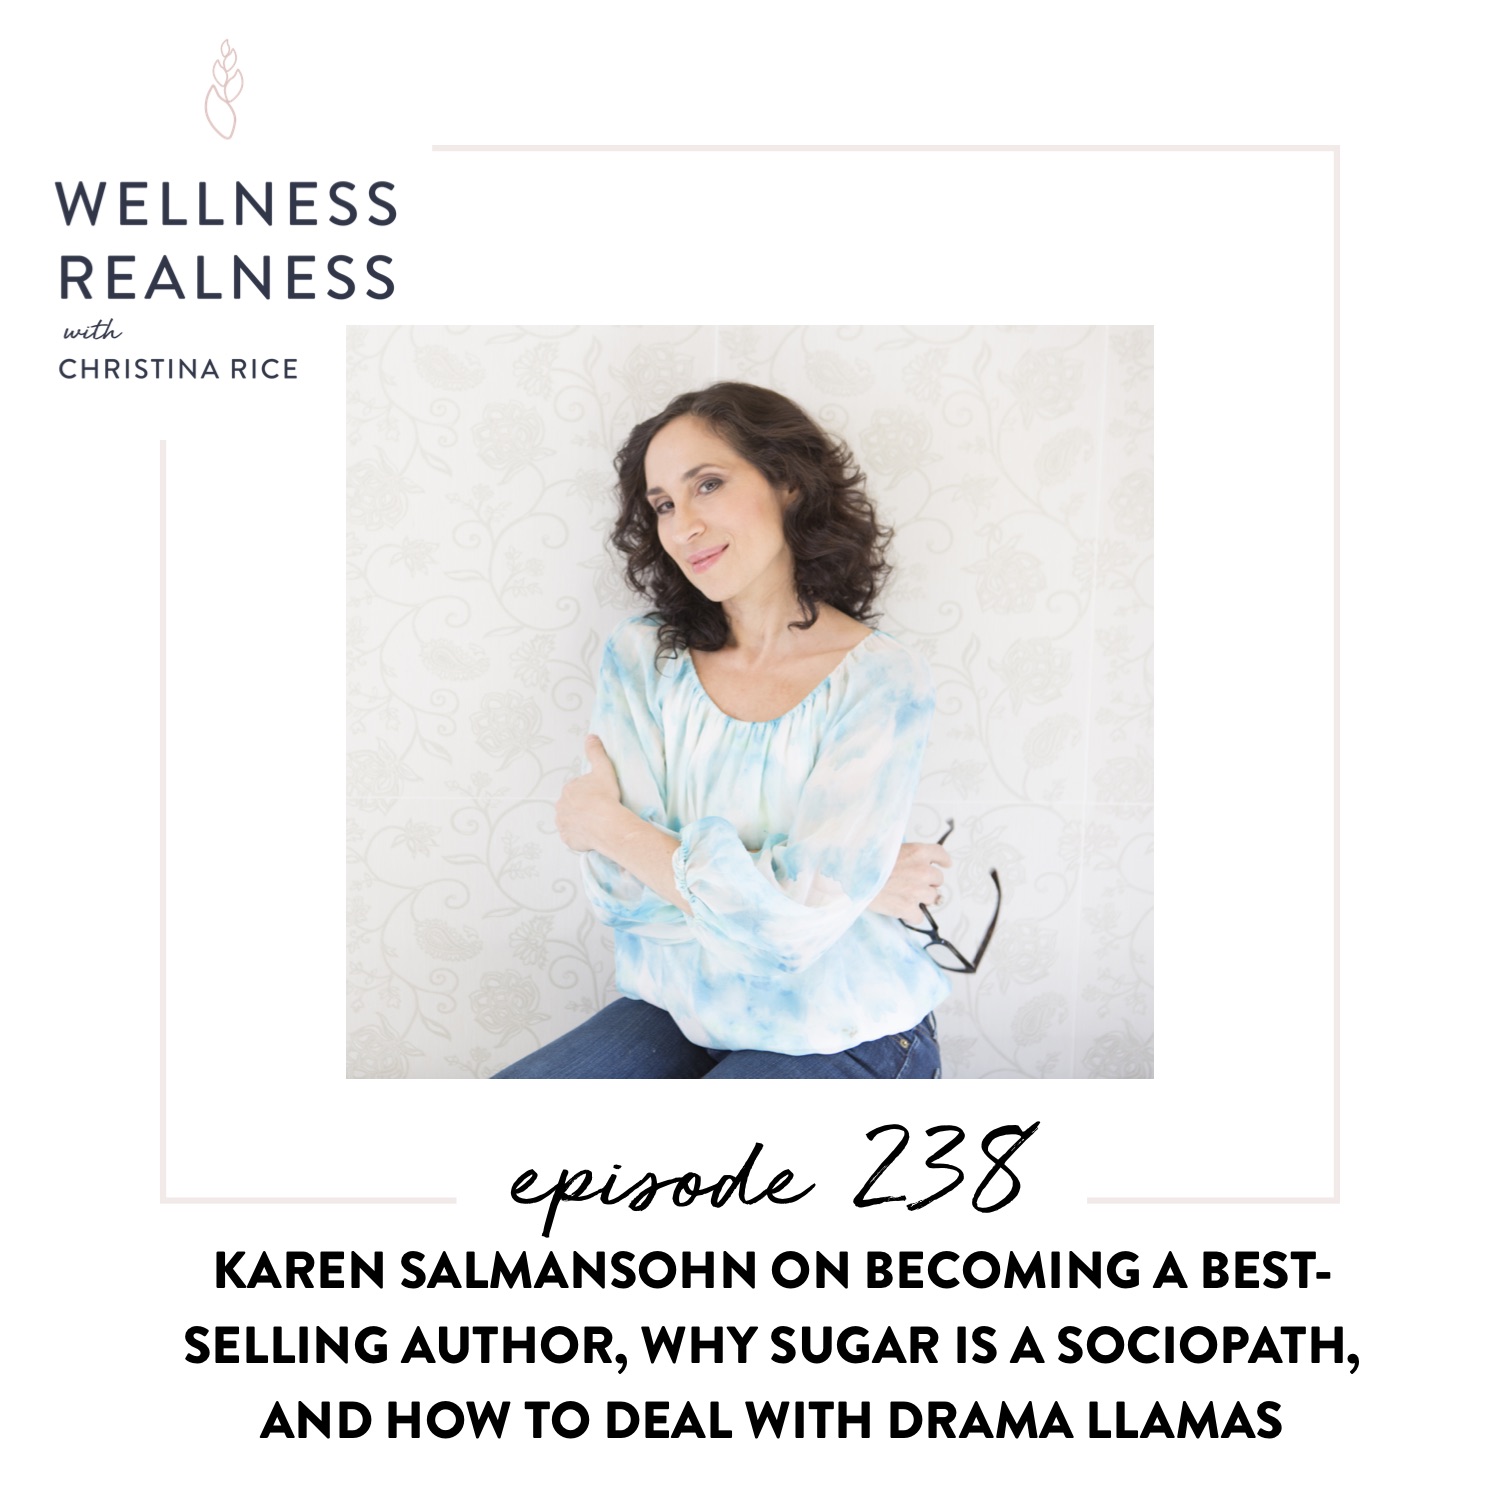 238: Karen Salmansohn on Becoming a Best-Selling Author, Why Sugar is a Sociopath, and How to Deal with Drama Llamas